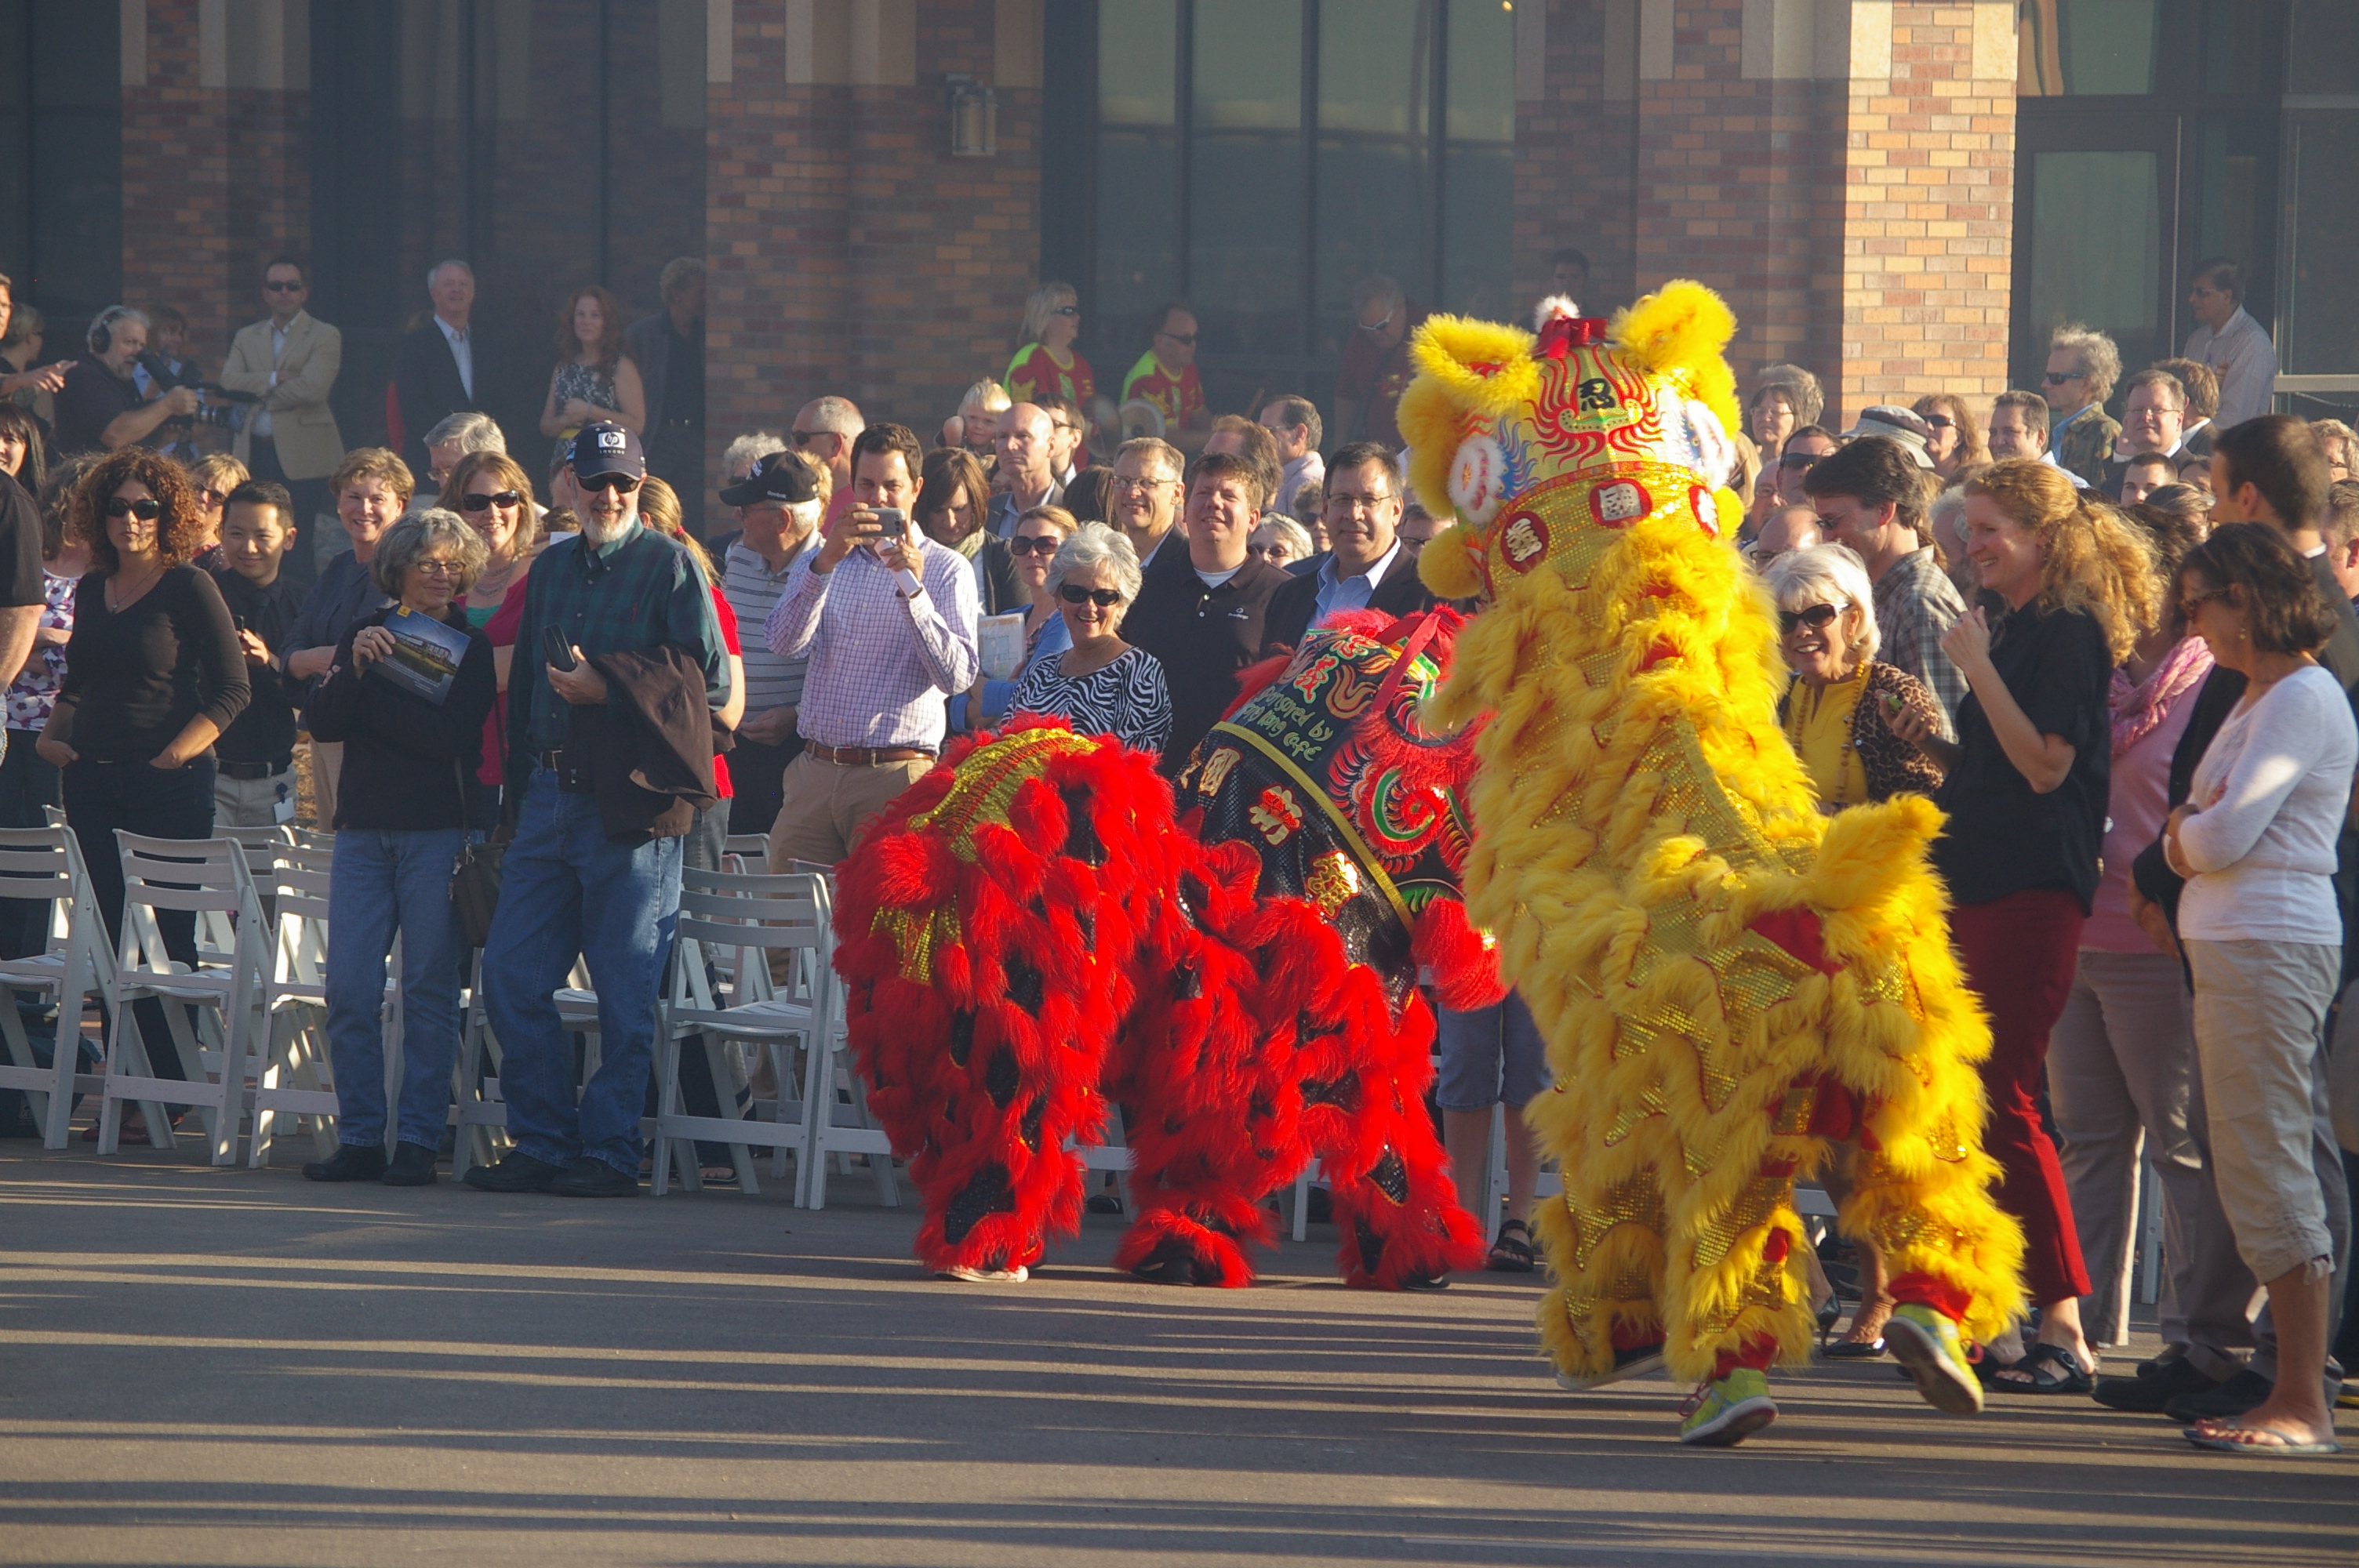 Forget the ribbon cutting, we have fireworks and dragons dancing and playing with the crowd.